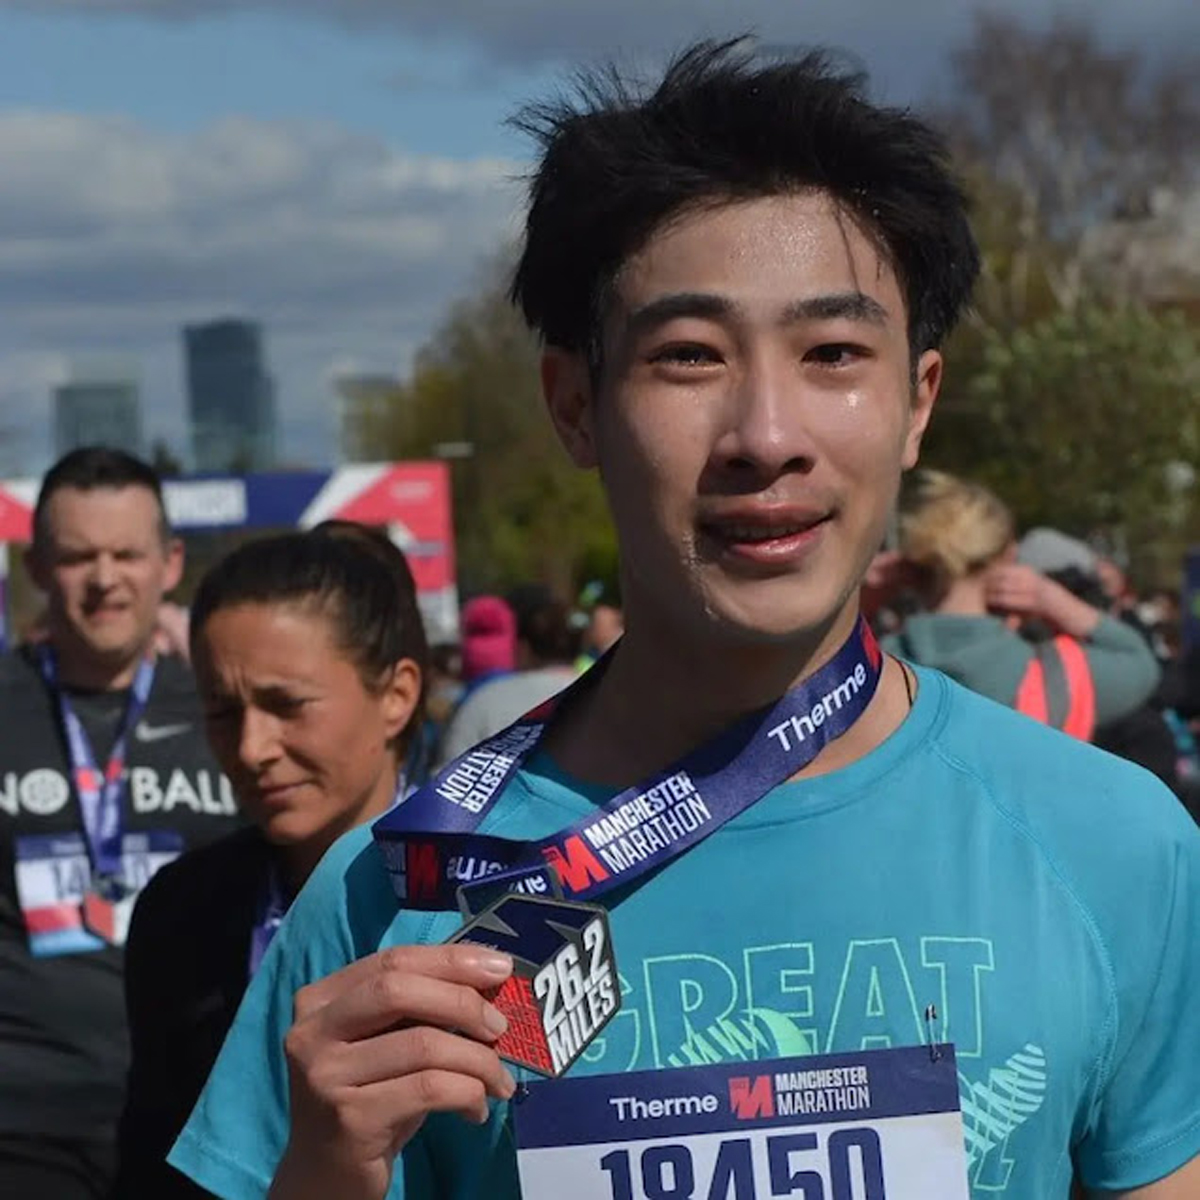 Viet-Anh crying tears of joy after the finishing in the Manchester Marathon in 2022 (University of Bristol/PA)